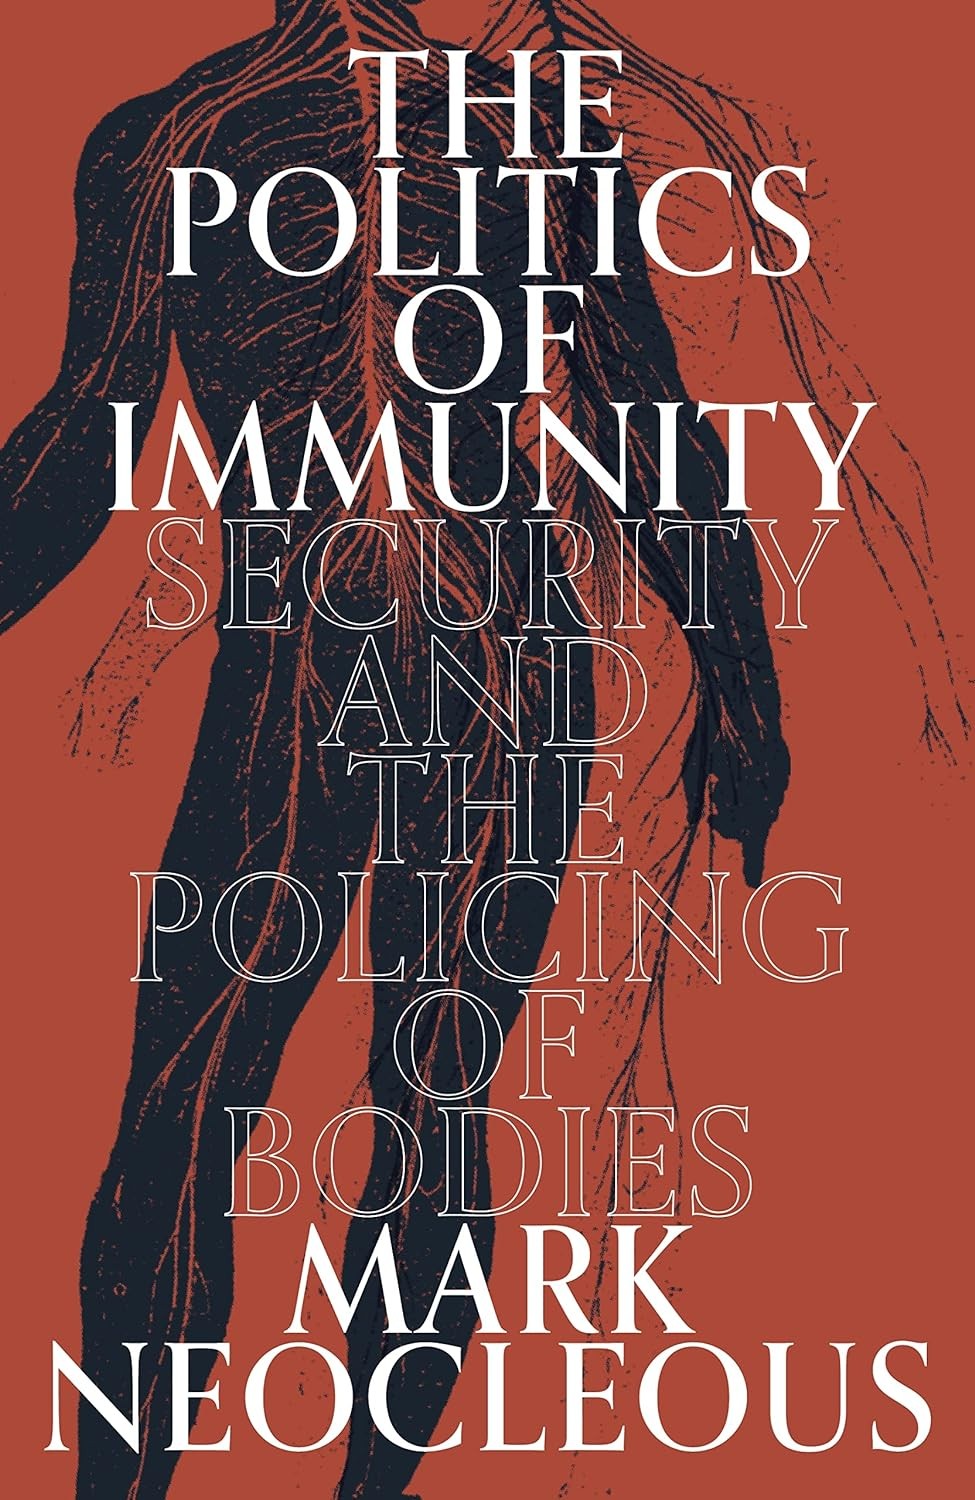 The Politics of Immunity:Security and the Policing of Bodies
